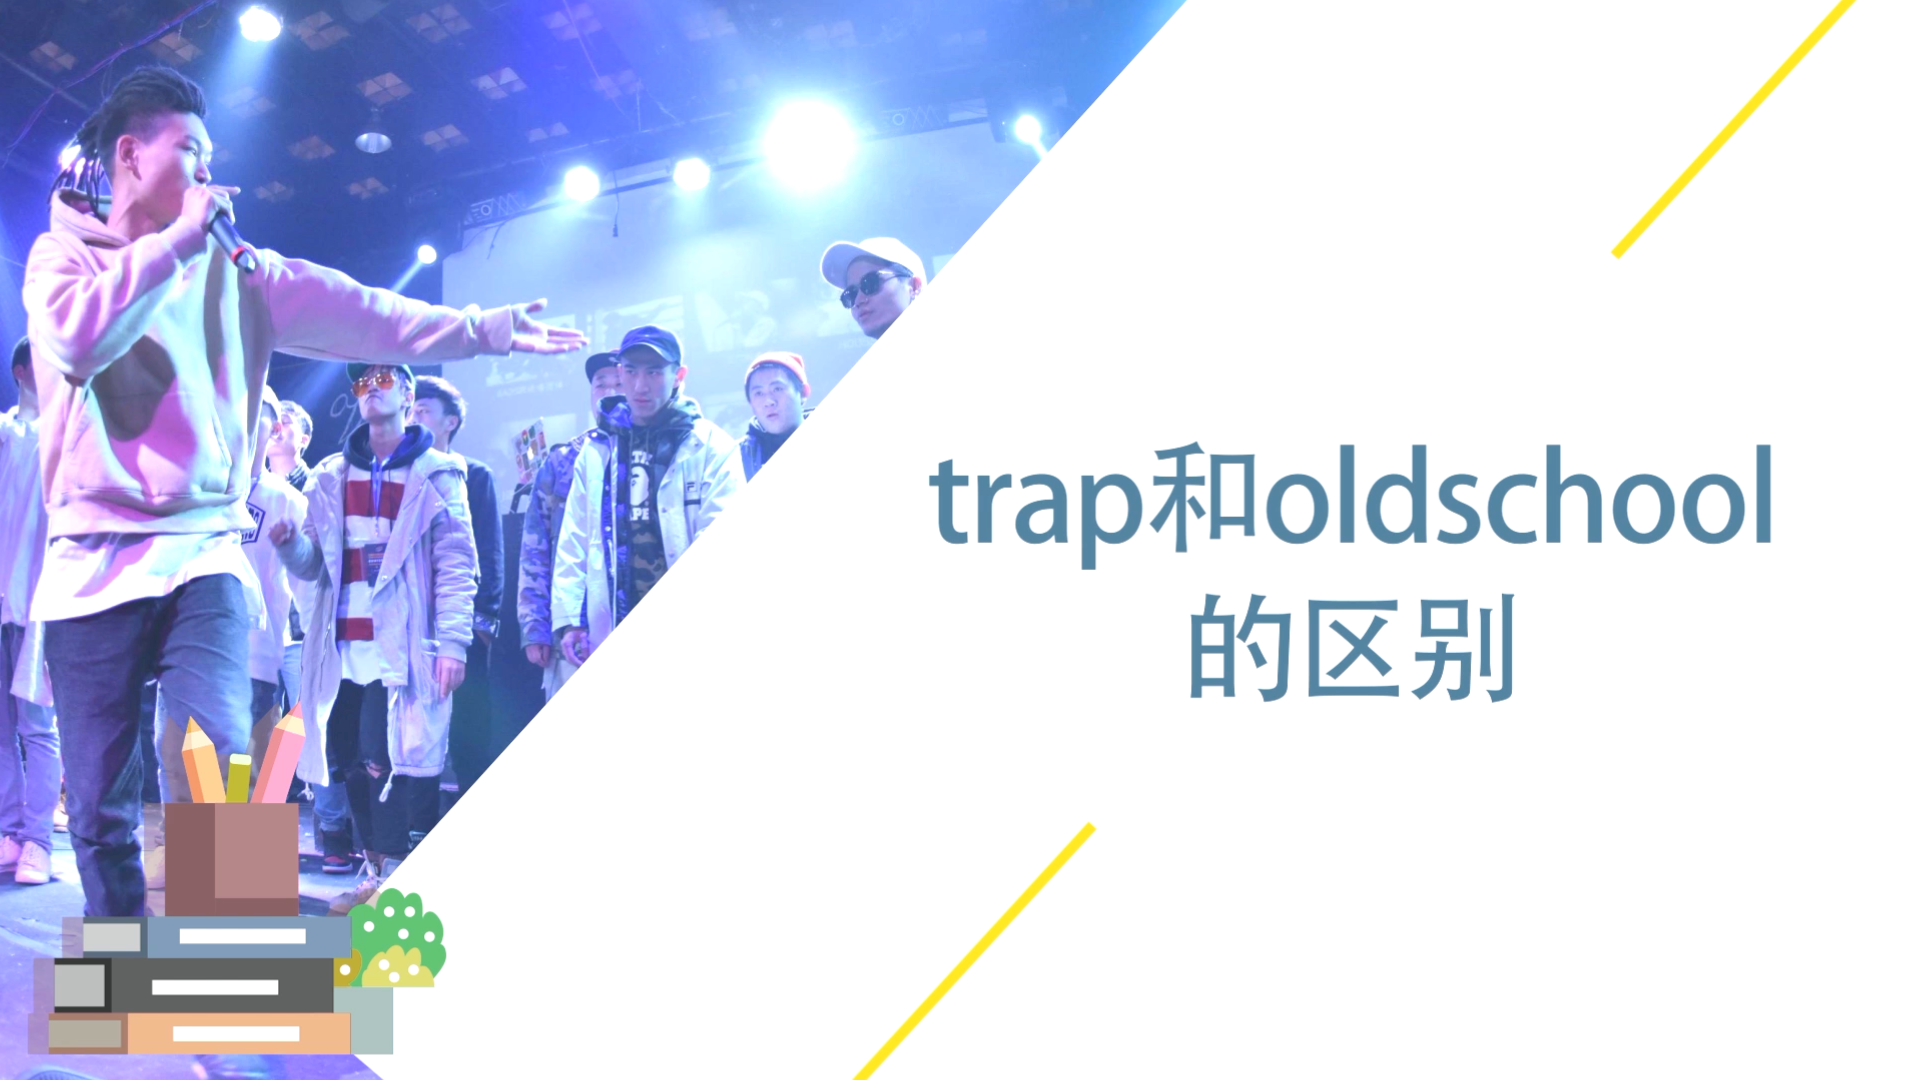 trap和oldschool的区别